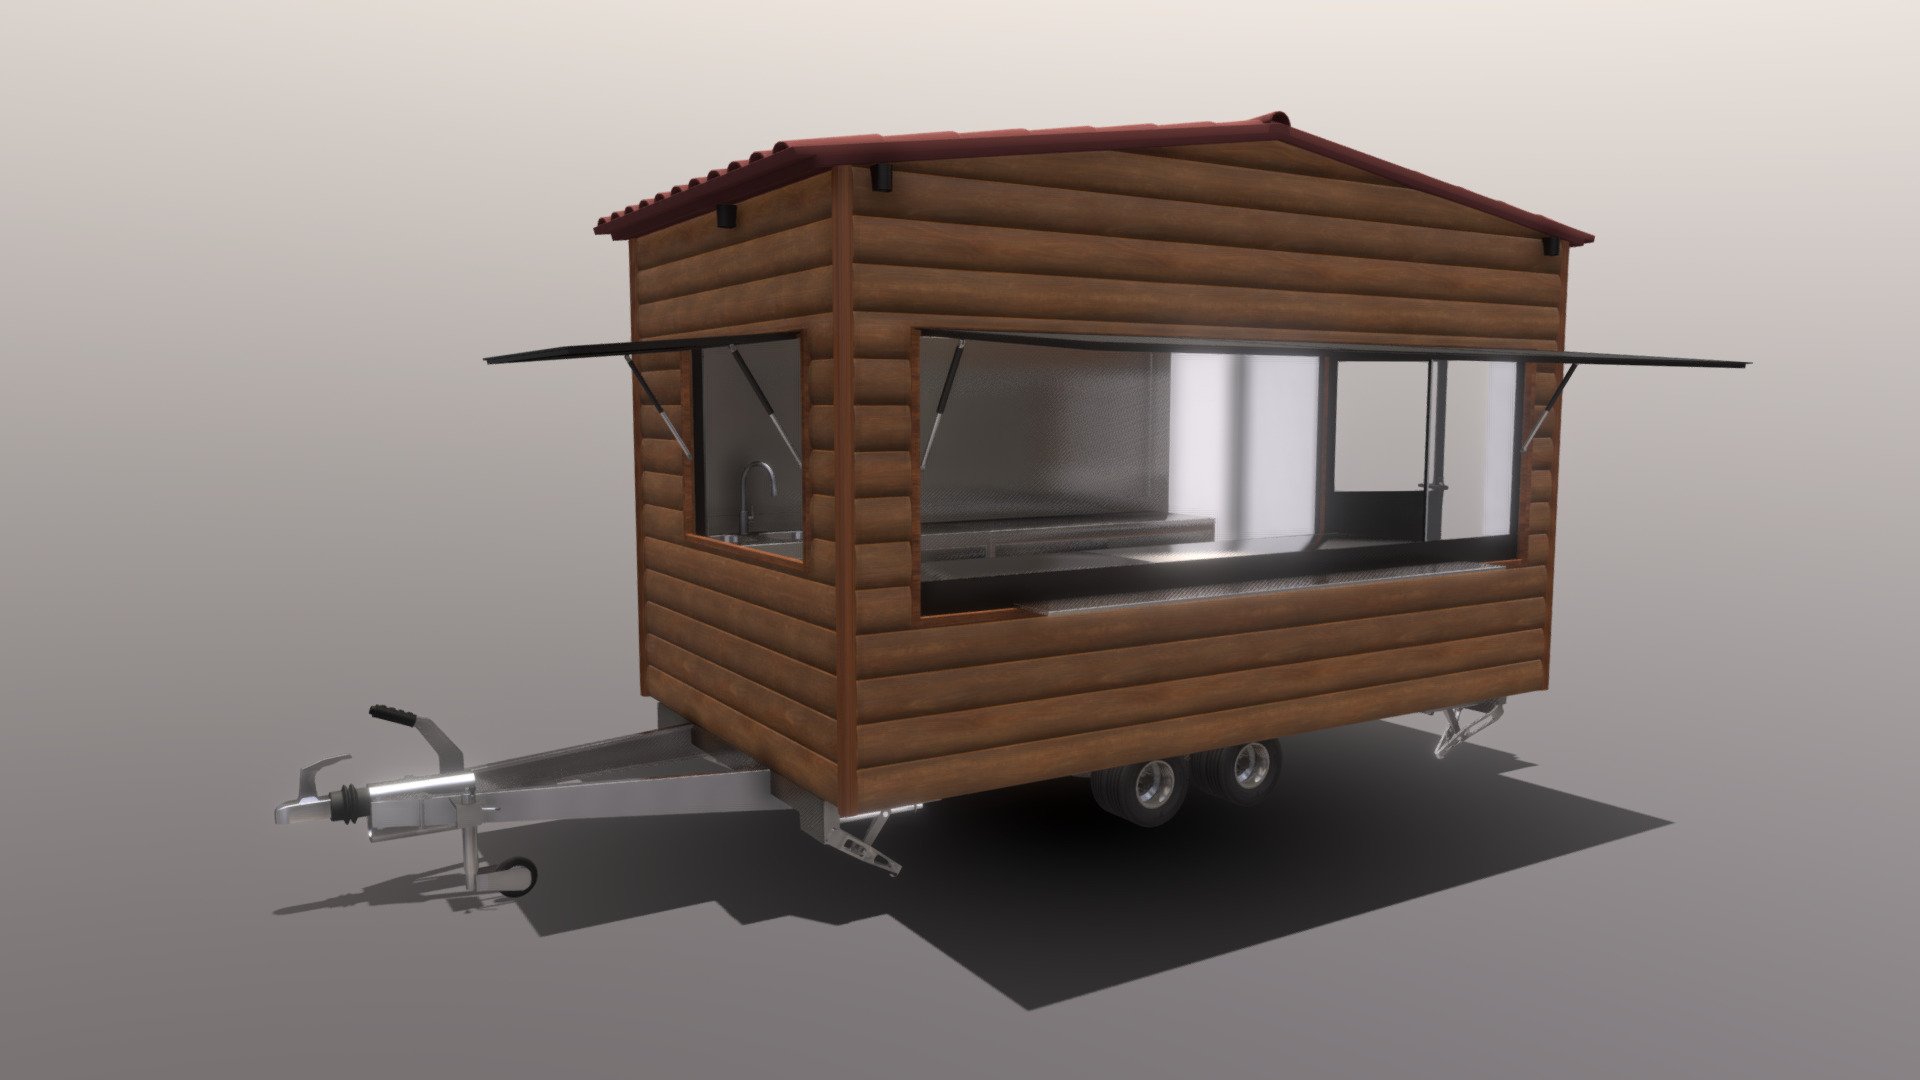 Hello every one! This is our Large food trailer in Traditional category. We are a construction company and we build food trailer such as this! We are based in Larisa, Greece. We construct our food trailers from the beginning and we deliver to our client! You can find more on our page and on our Youtube cahnnel! Enjoy! Page: https://www.kantines.com/en/ Youtube Channel: https://www.youtube.com/channel/UC9tjeUF84Me9ylLlnX4MHTw - Food trailer - wooden covering (4.5m x 2.25m) - 3D model by Kantines.com 3d model